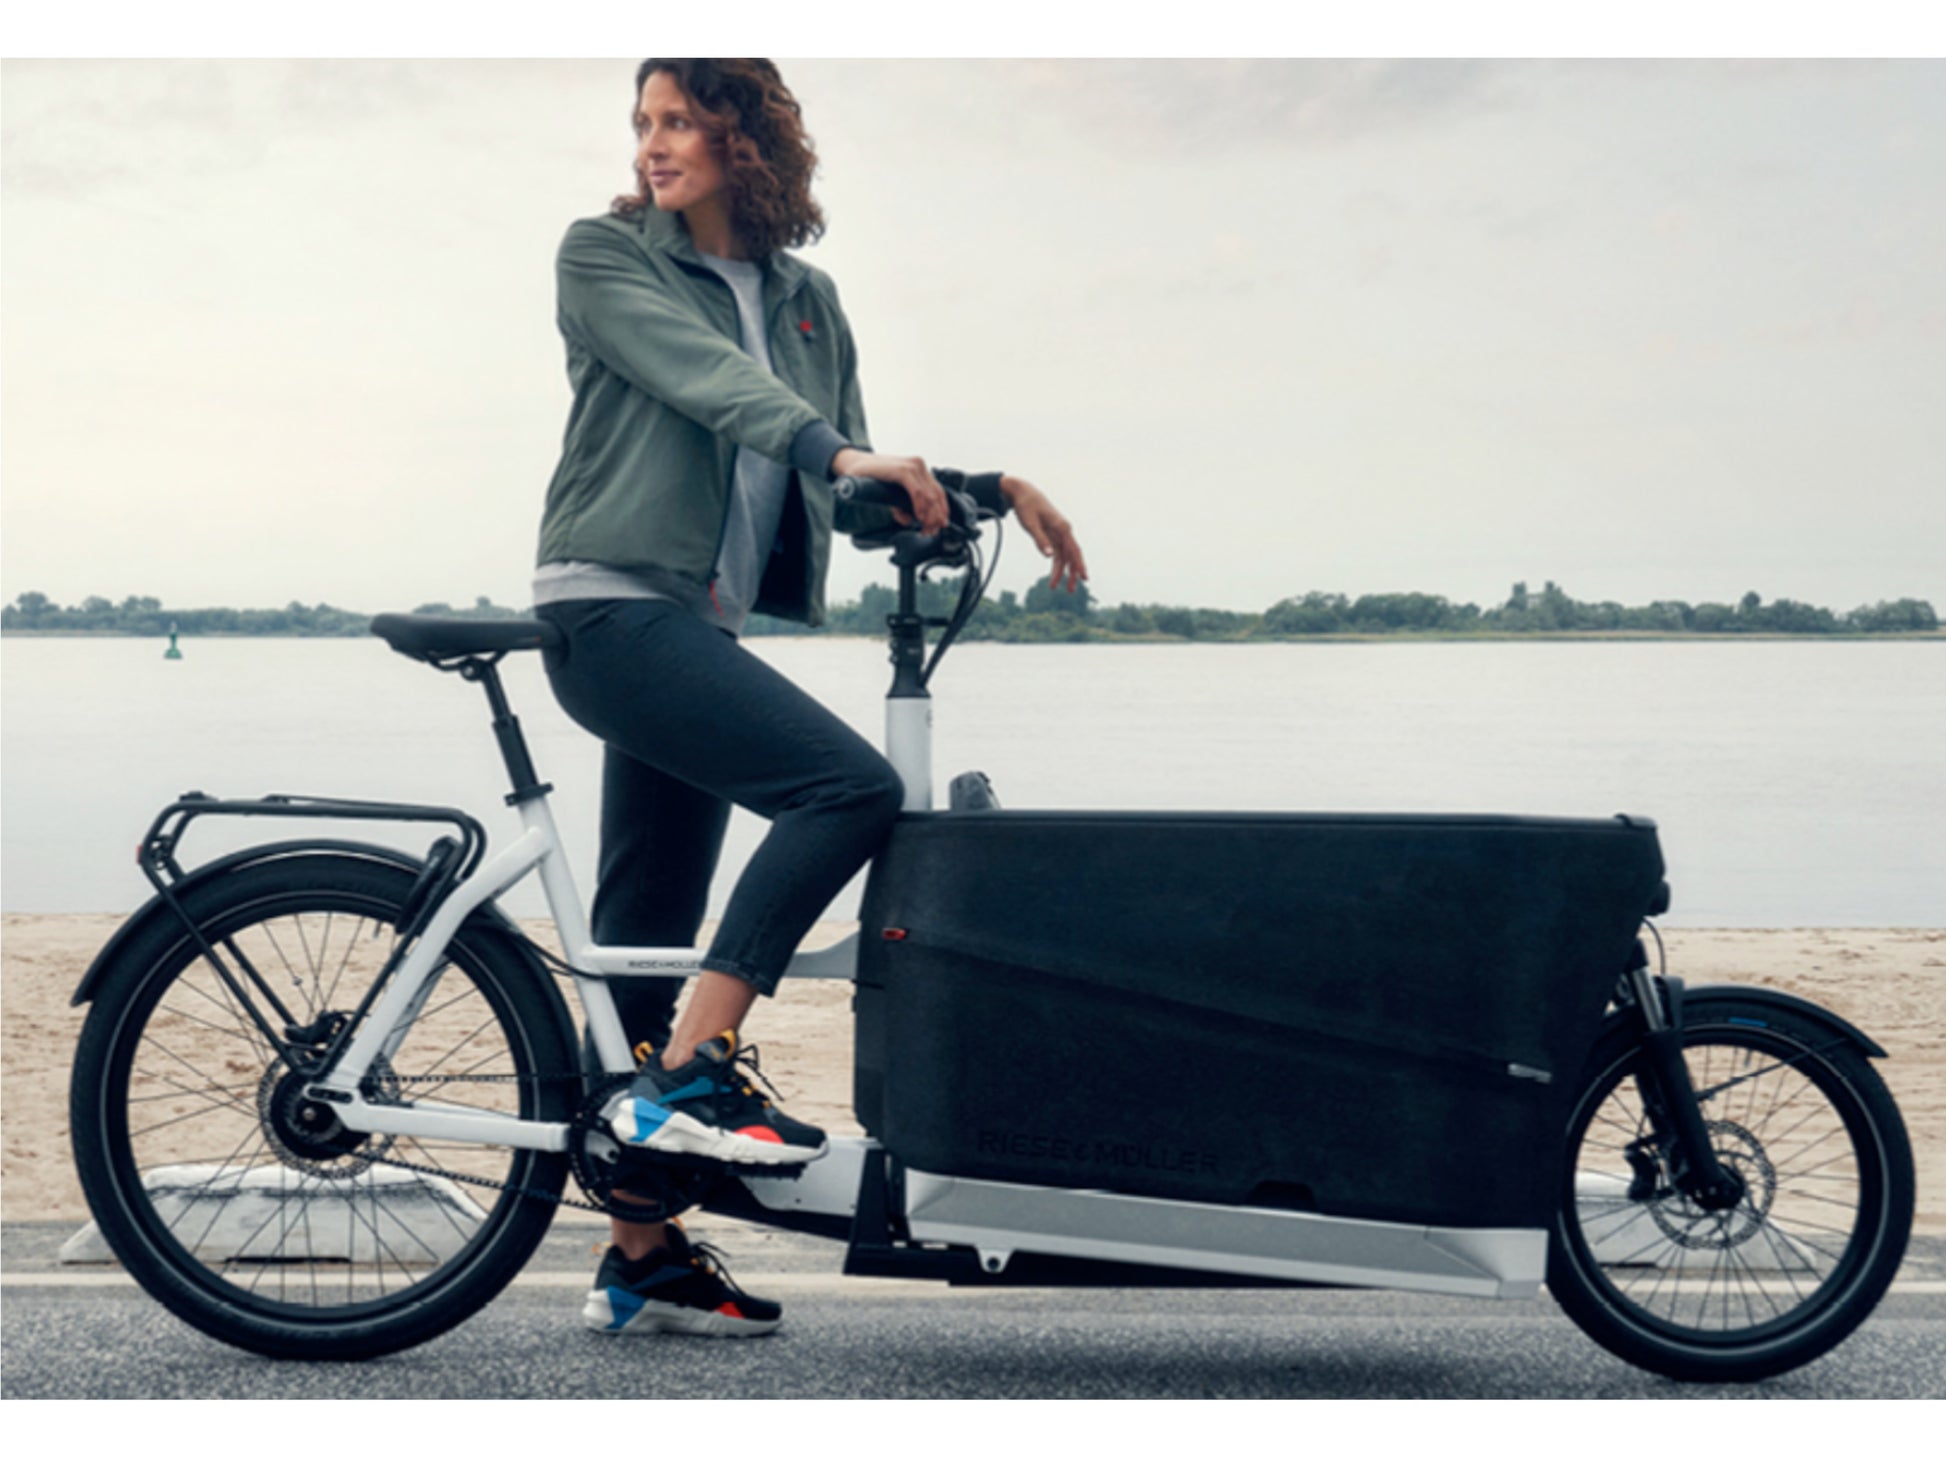 Riese & Muller Packster 70 Touring cargo eMTB hardtail woman standing with bike by waterfront